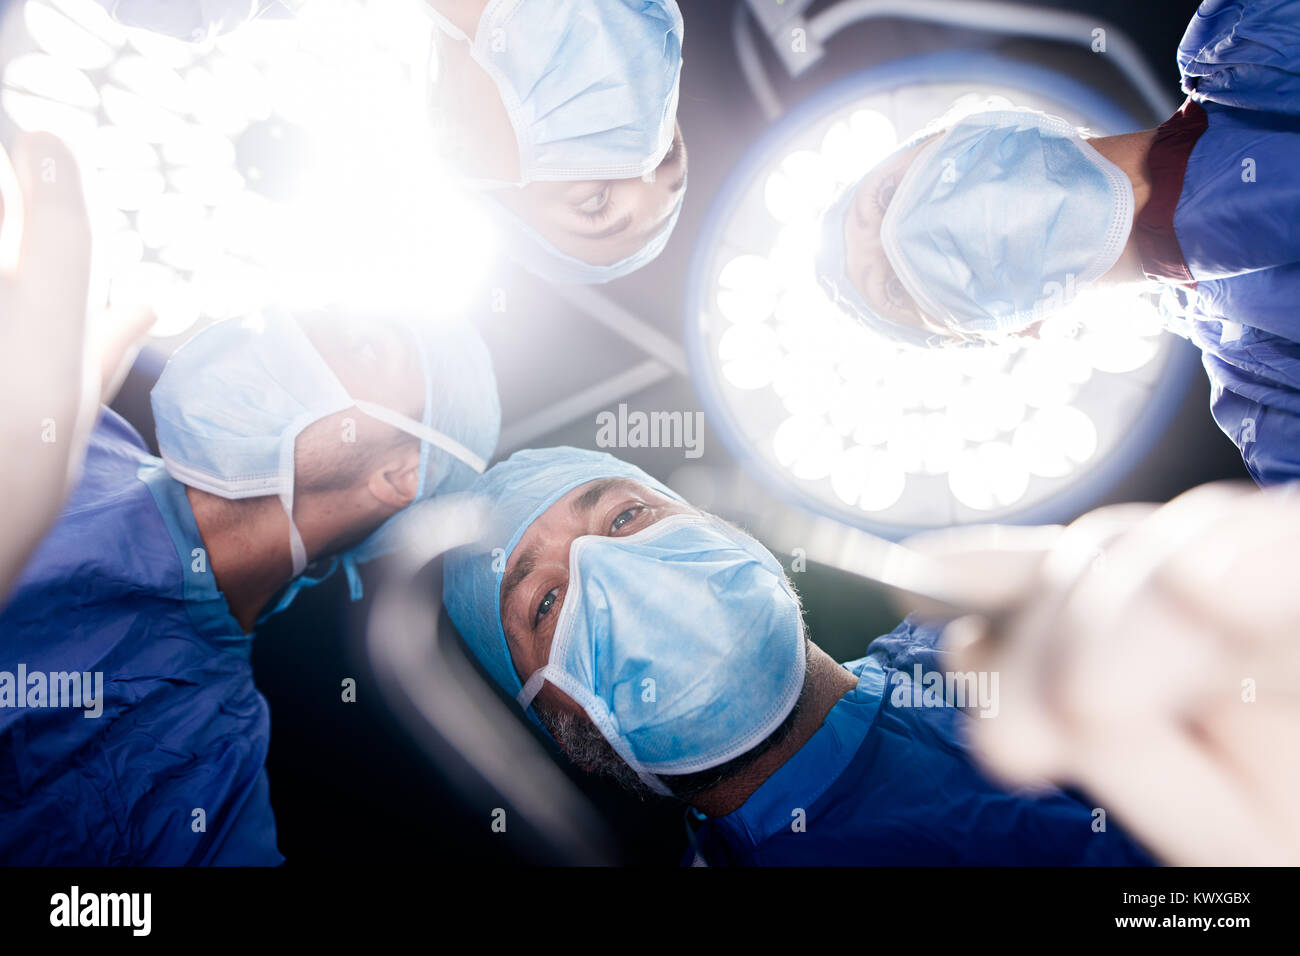 Team of doctors operating under surgery lights in operation theater. Point of view shot of surgeons performing dental surgery in hospital. Stock Photo